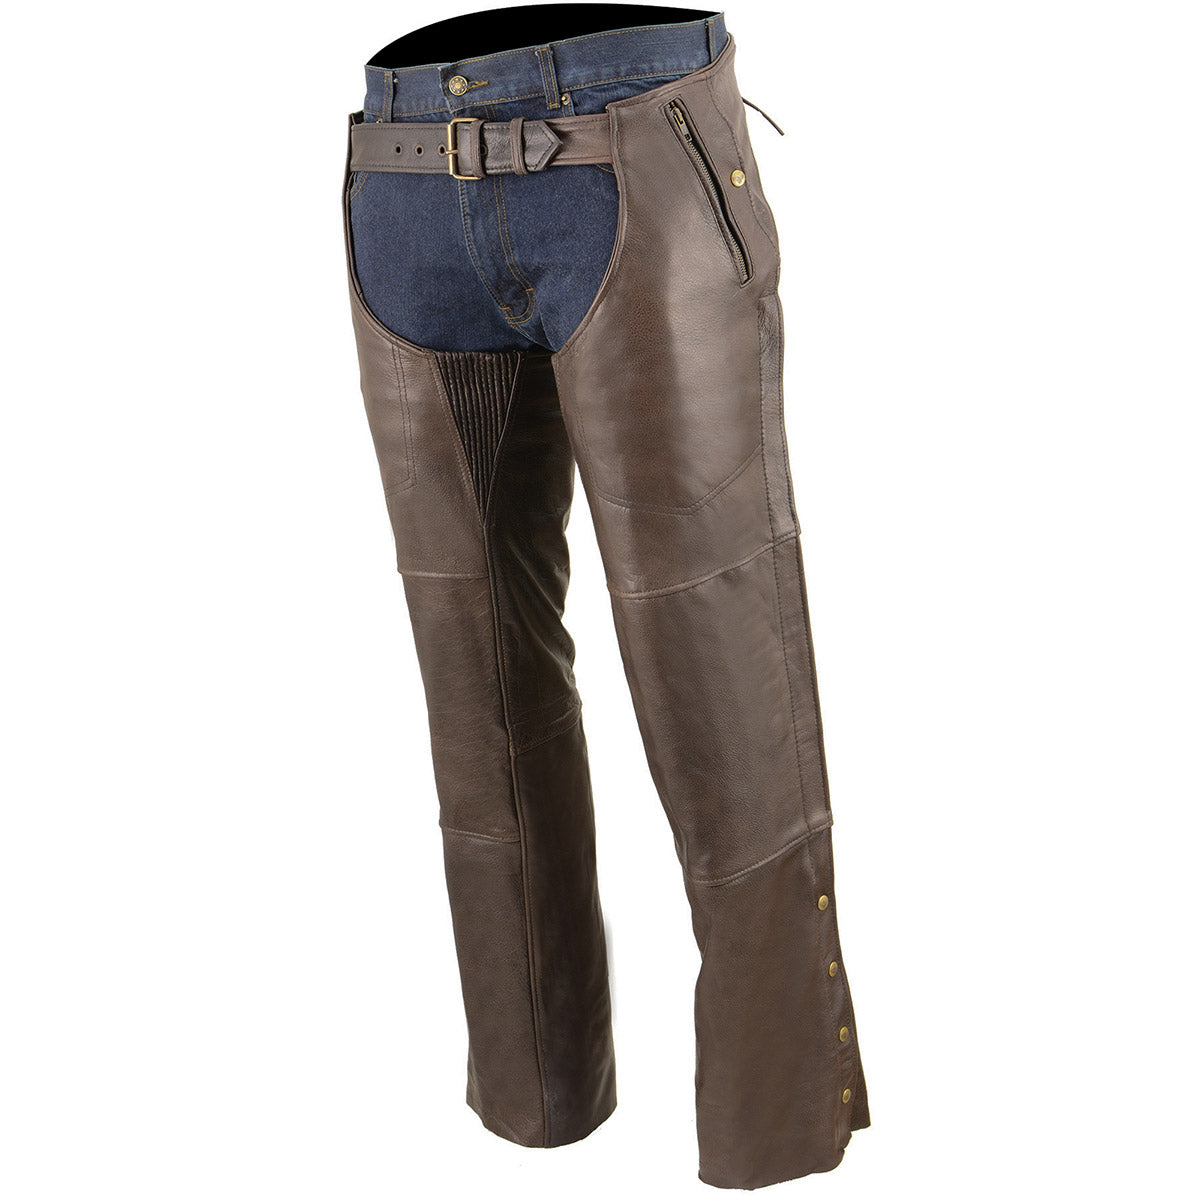 Milwaukee Leather Chaps for Men's Retro Brown Naked Leather - Snap Out Thermal 4-Pockets Motorcycle Chap - ML1191RT